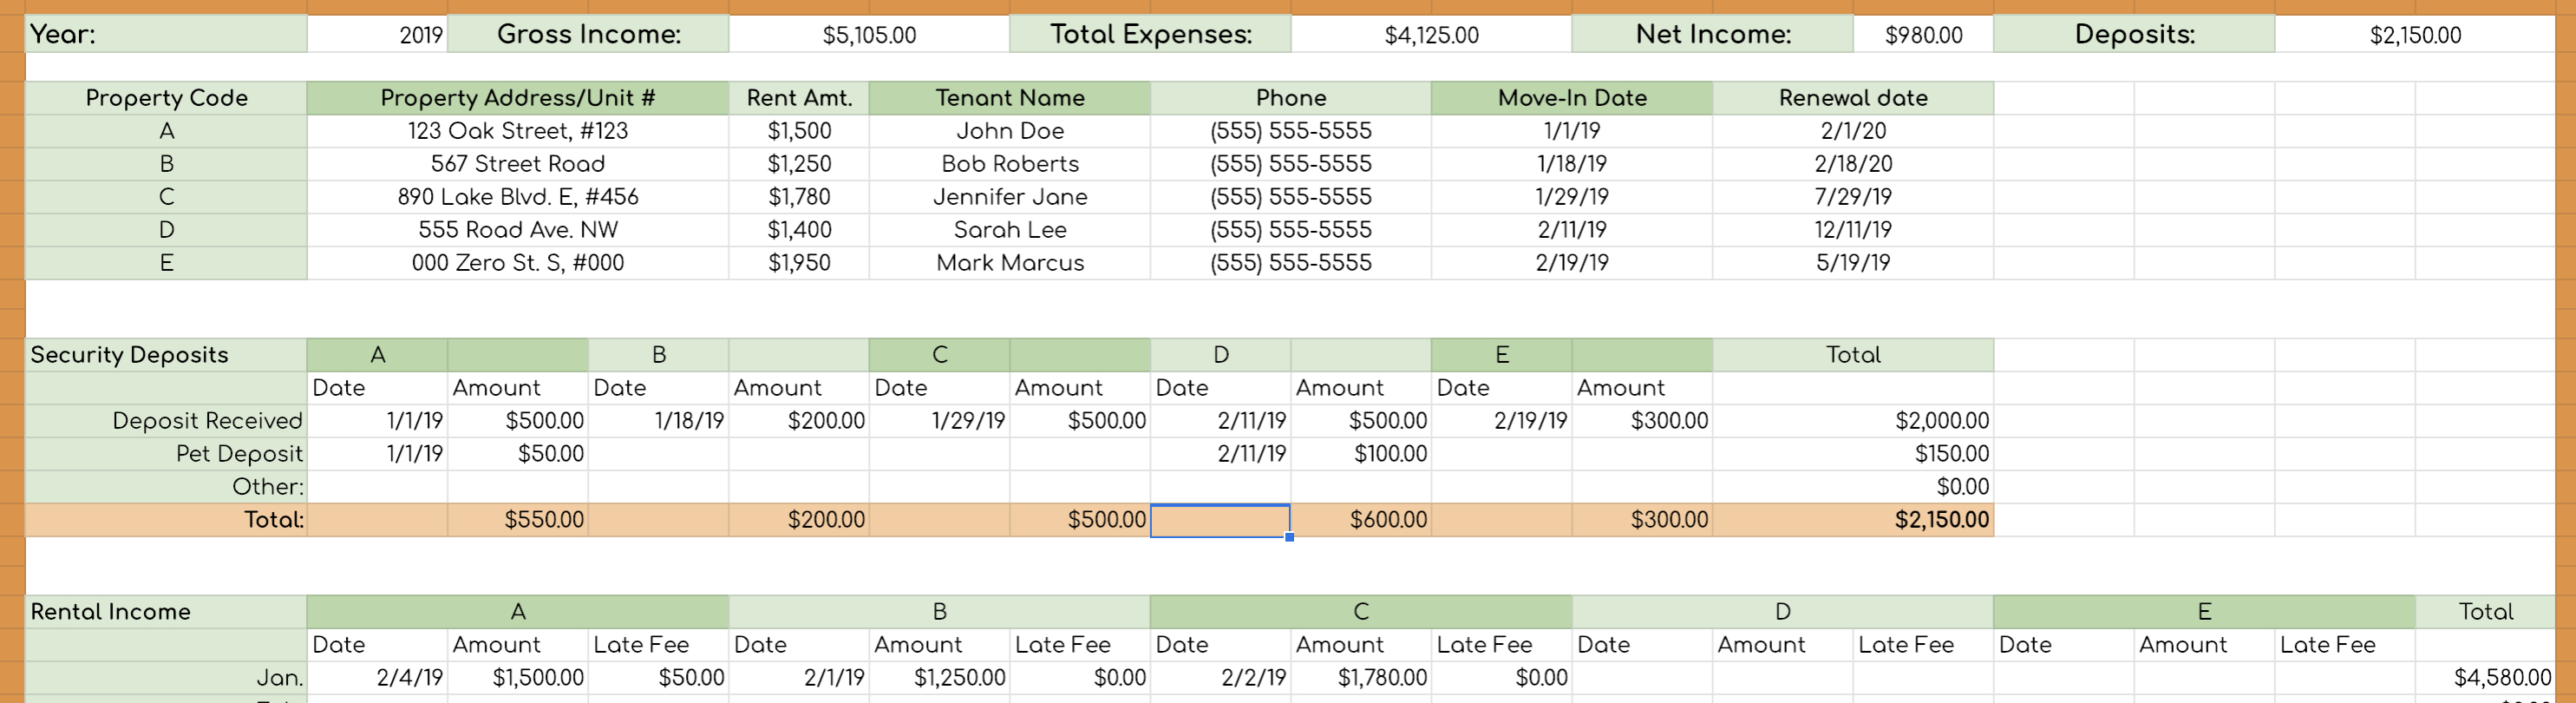 Rental Income And Expense Worksheet | db-excel.com